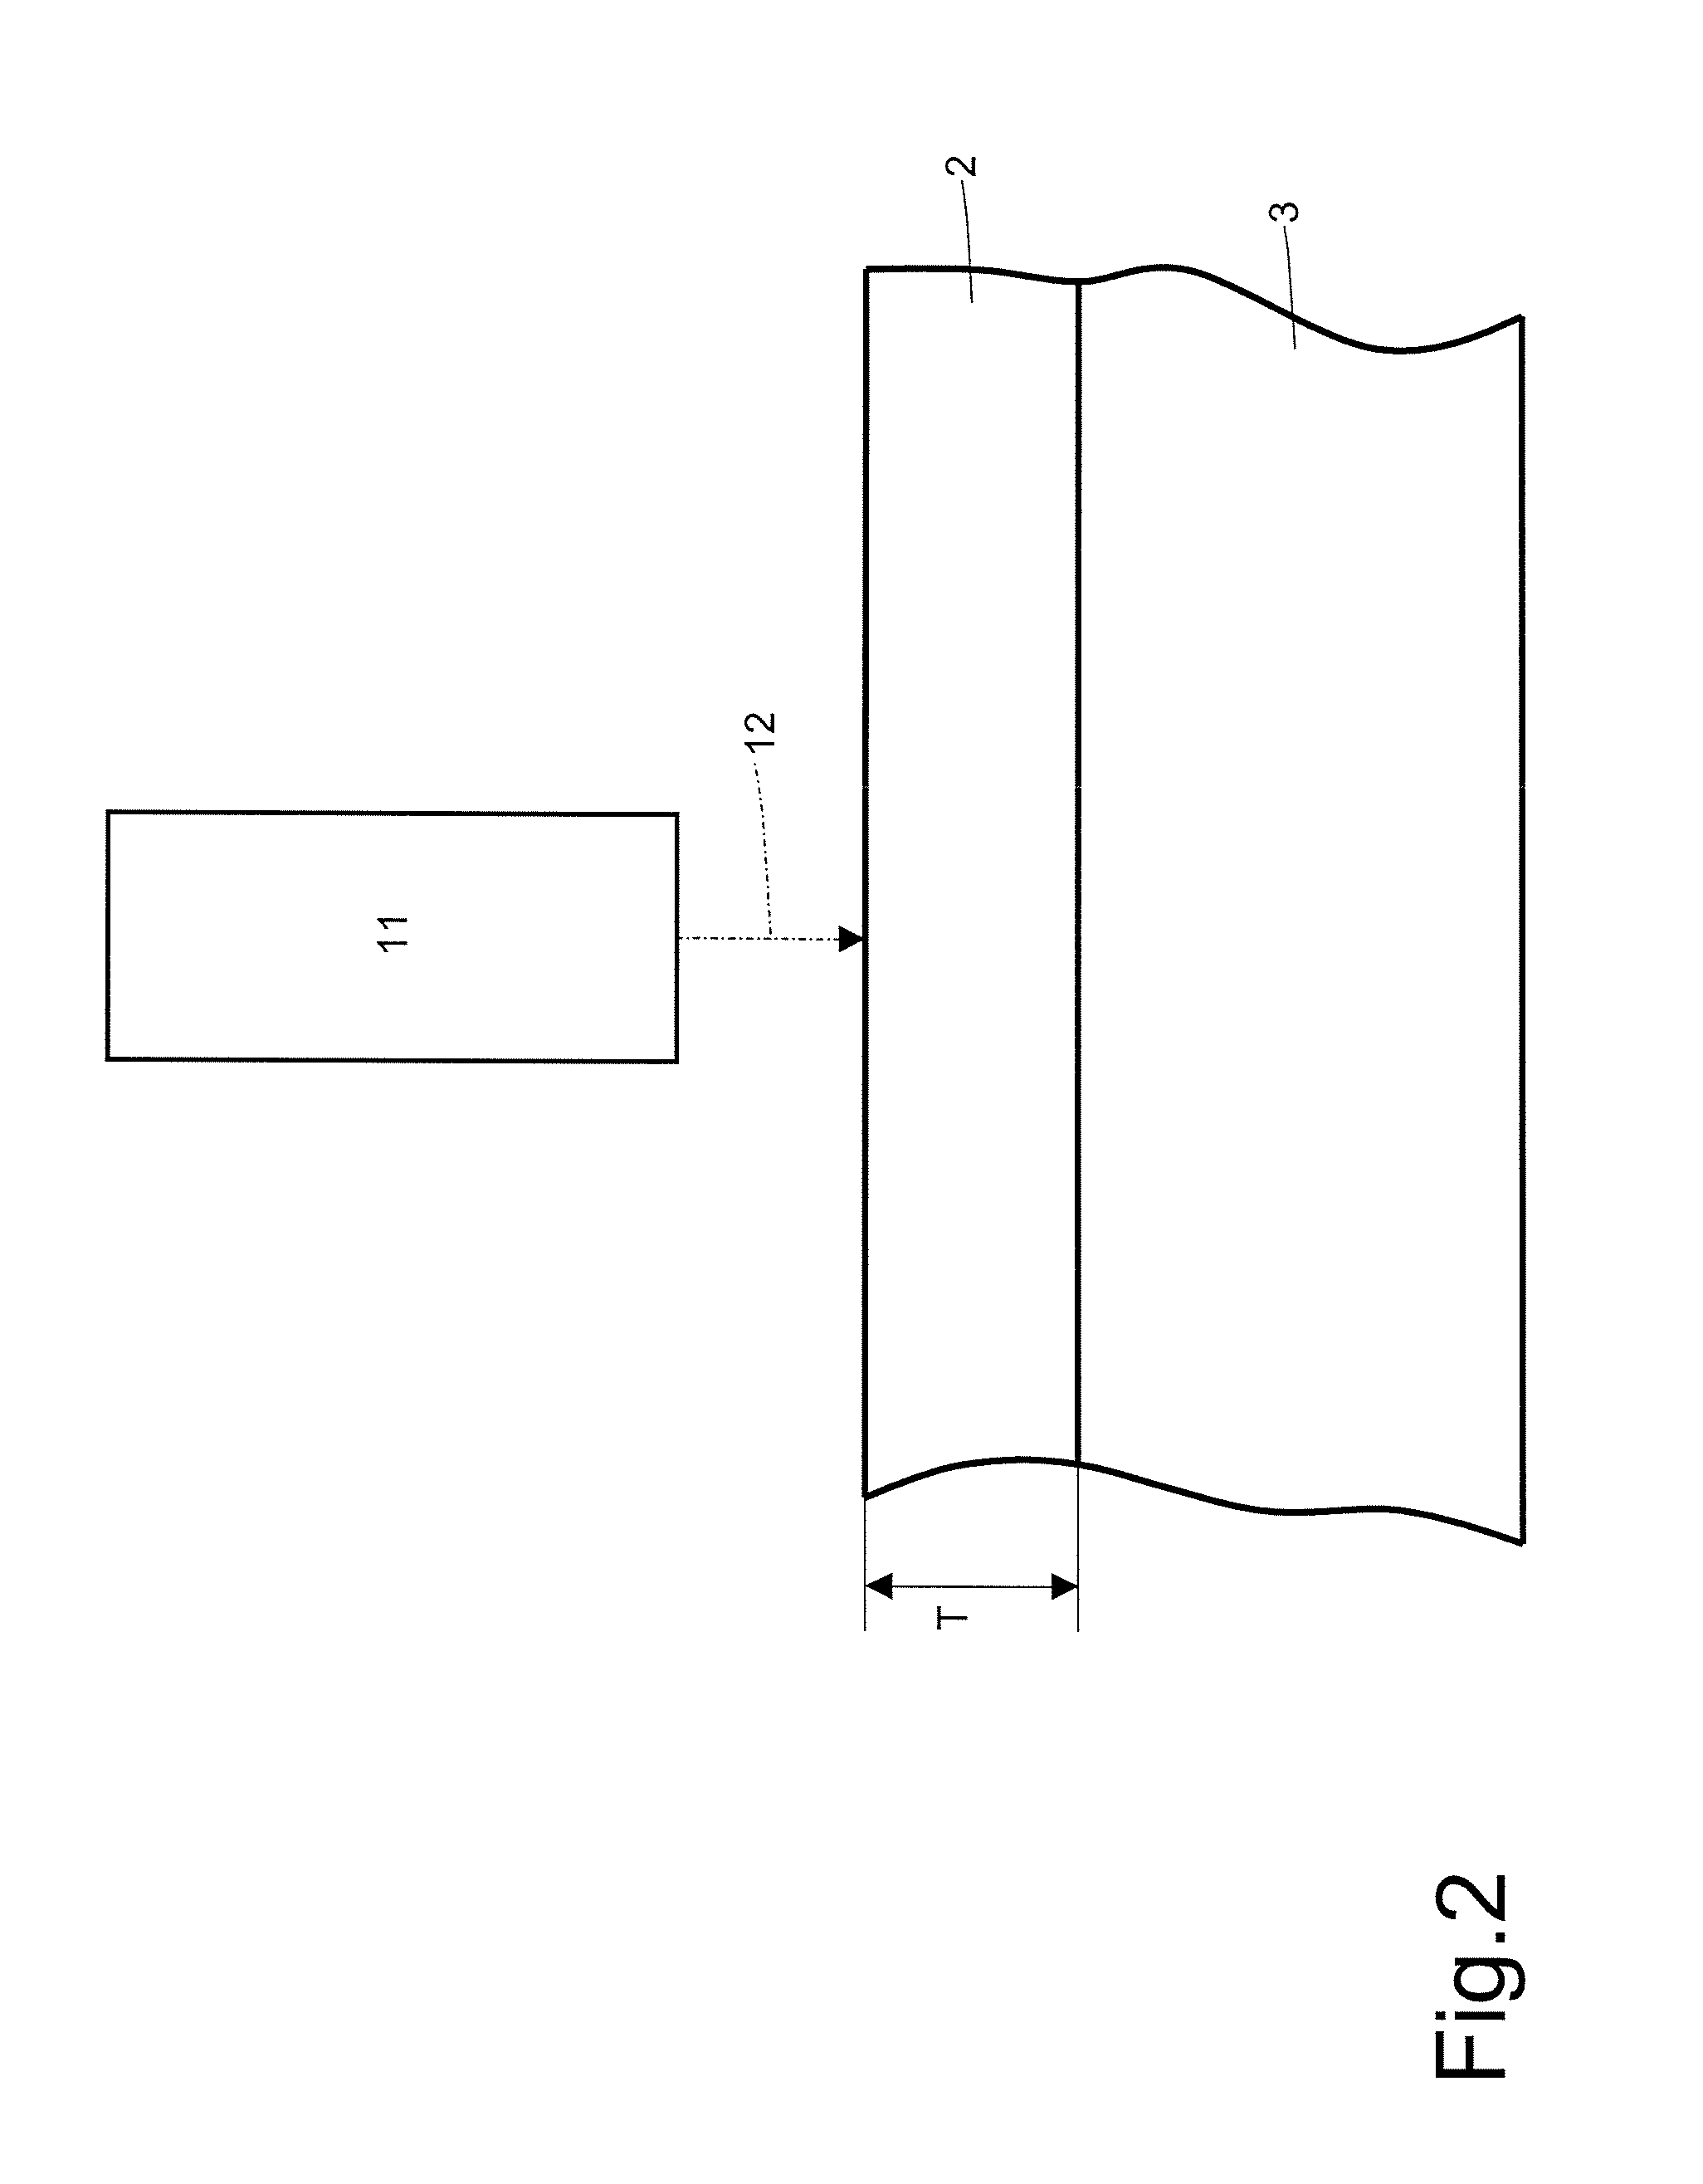 Method and apparatus for optically measuring by interferometry the thickness of an object